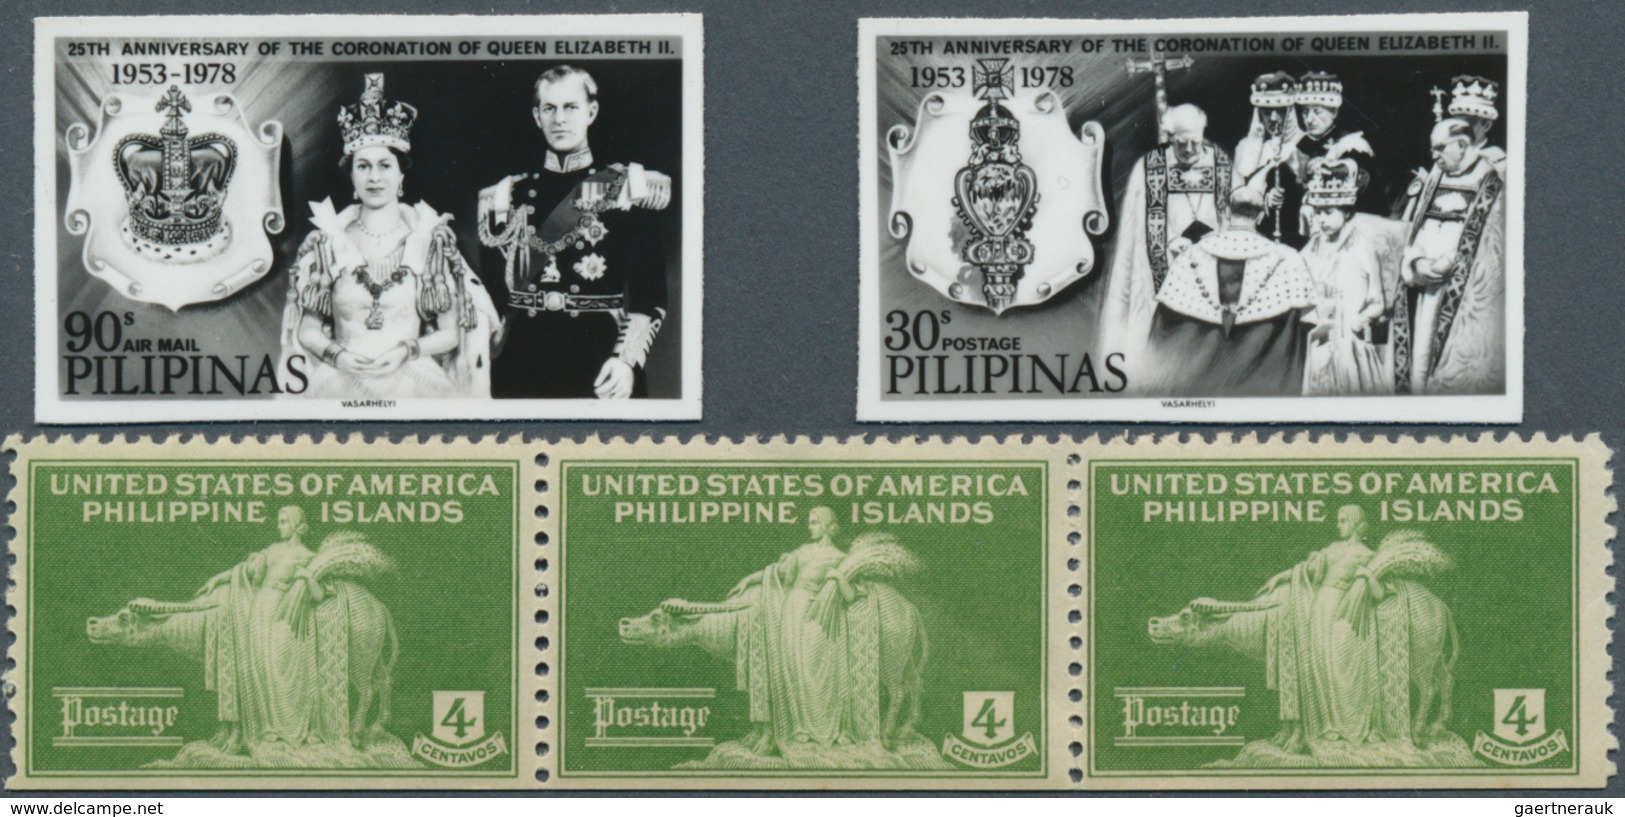 Philippinen: 1935/1978 (approx). Lot containing 20 essay photos, 2 negatives and 1 artwork pencil on